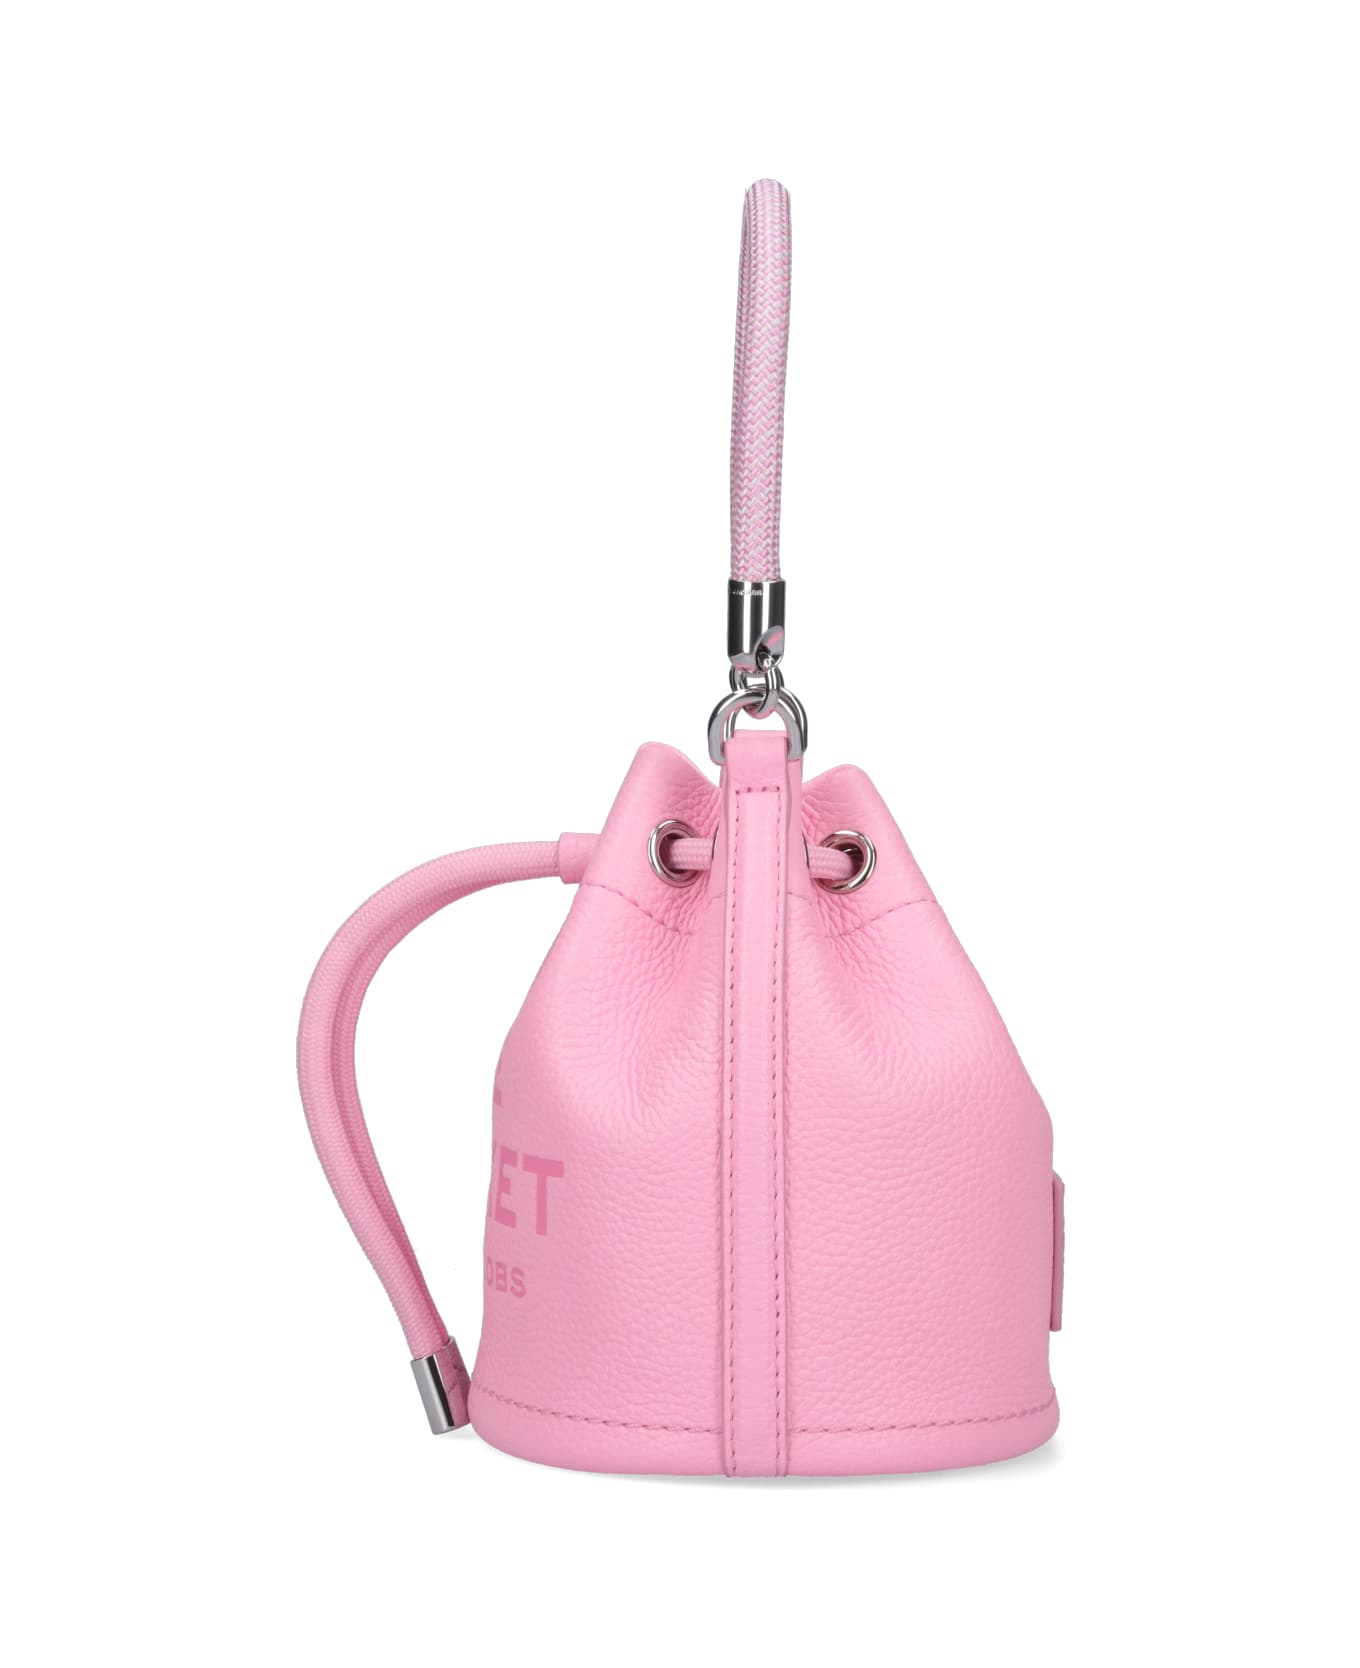 Marc Jacobs Mini Bag "the Leather Bucket" - Pink